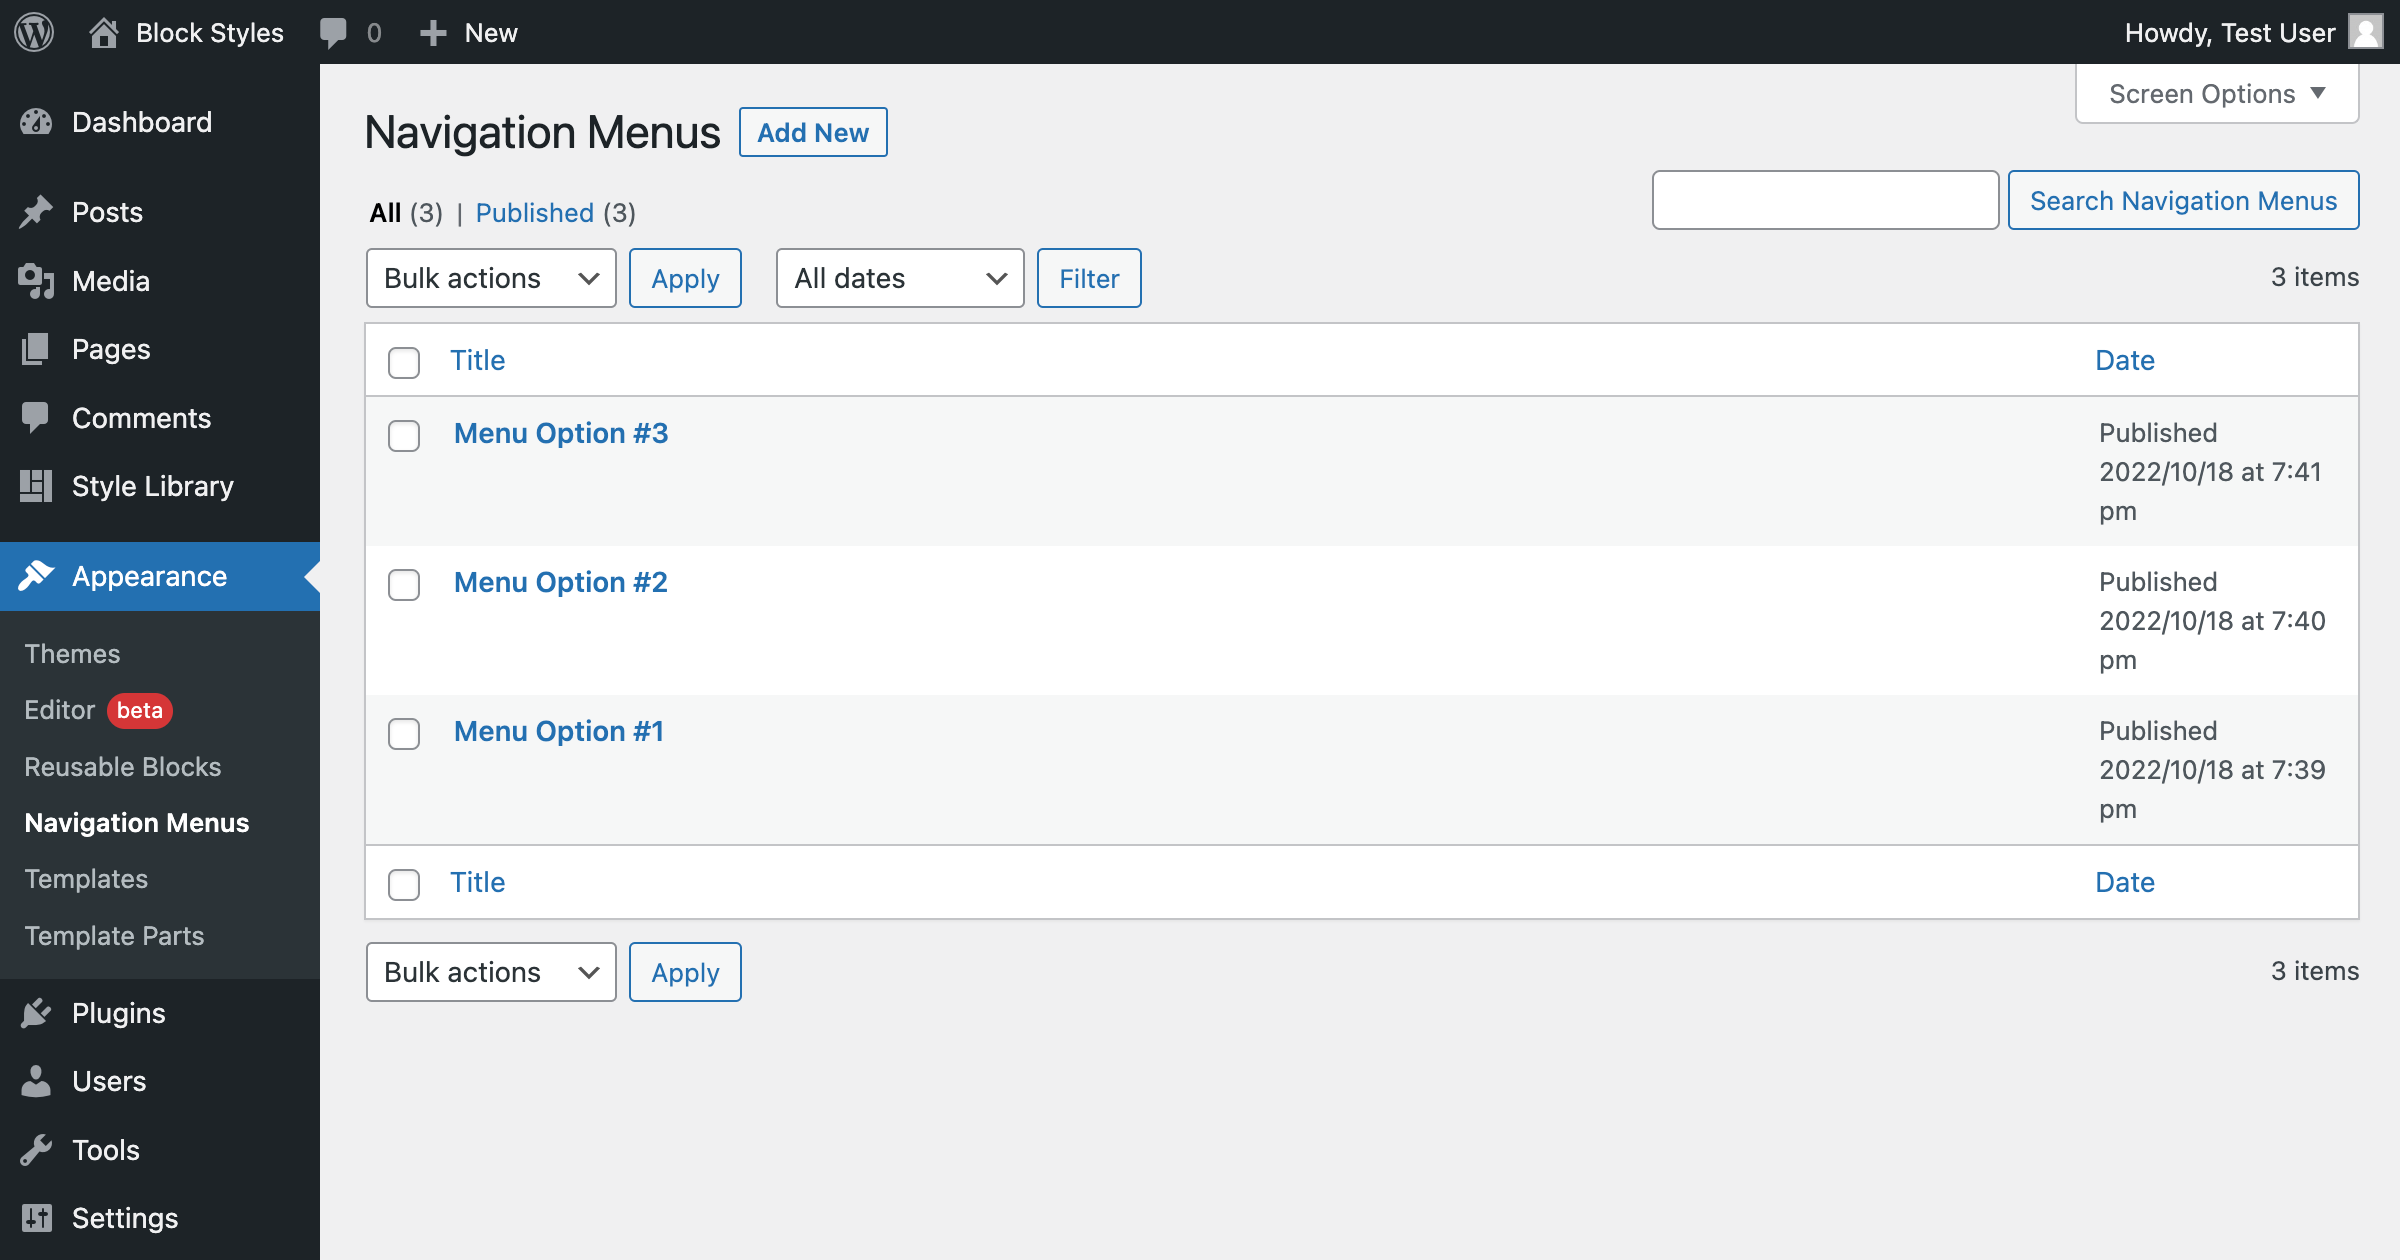 Navigation menus can be created from the WordPress admin area.